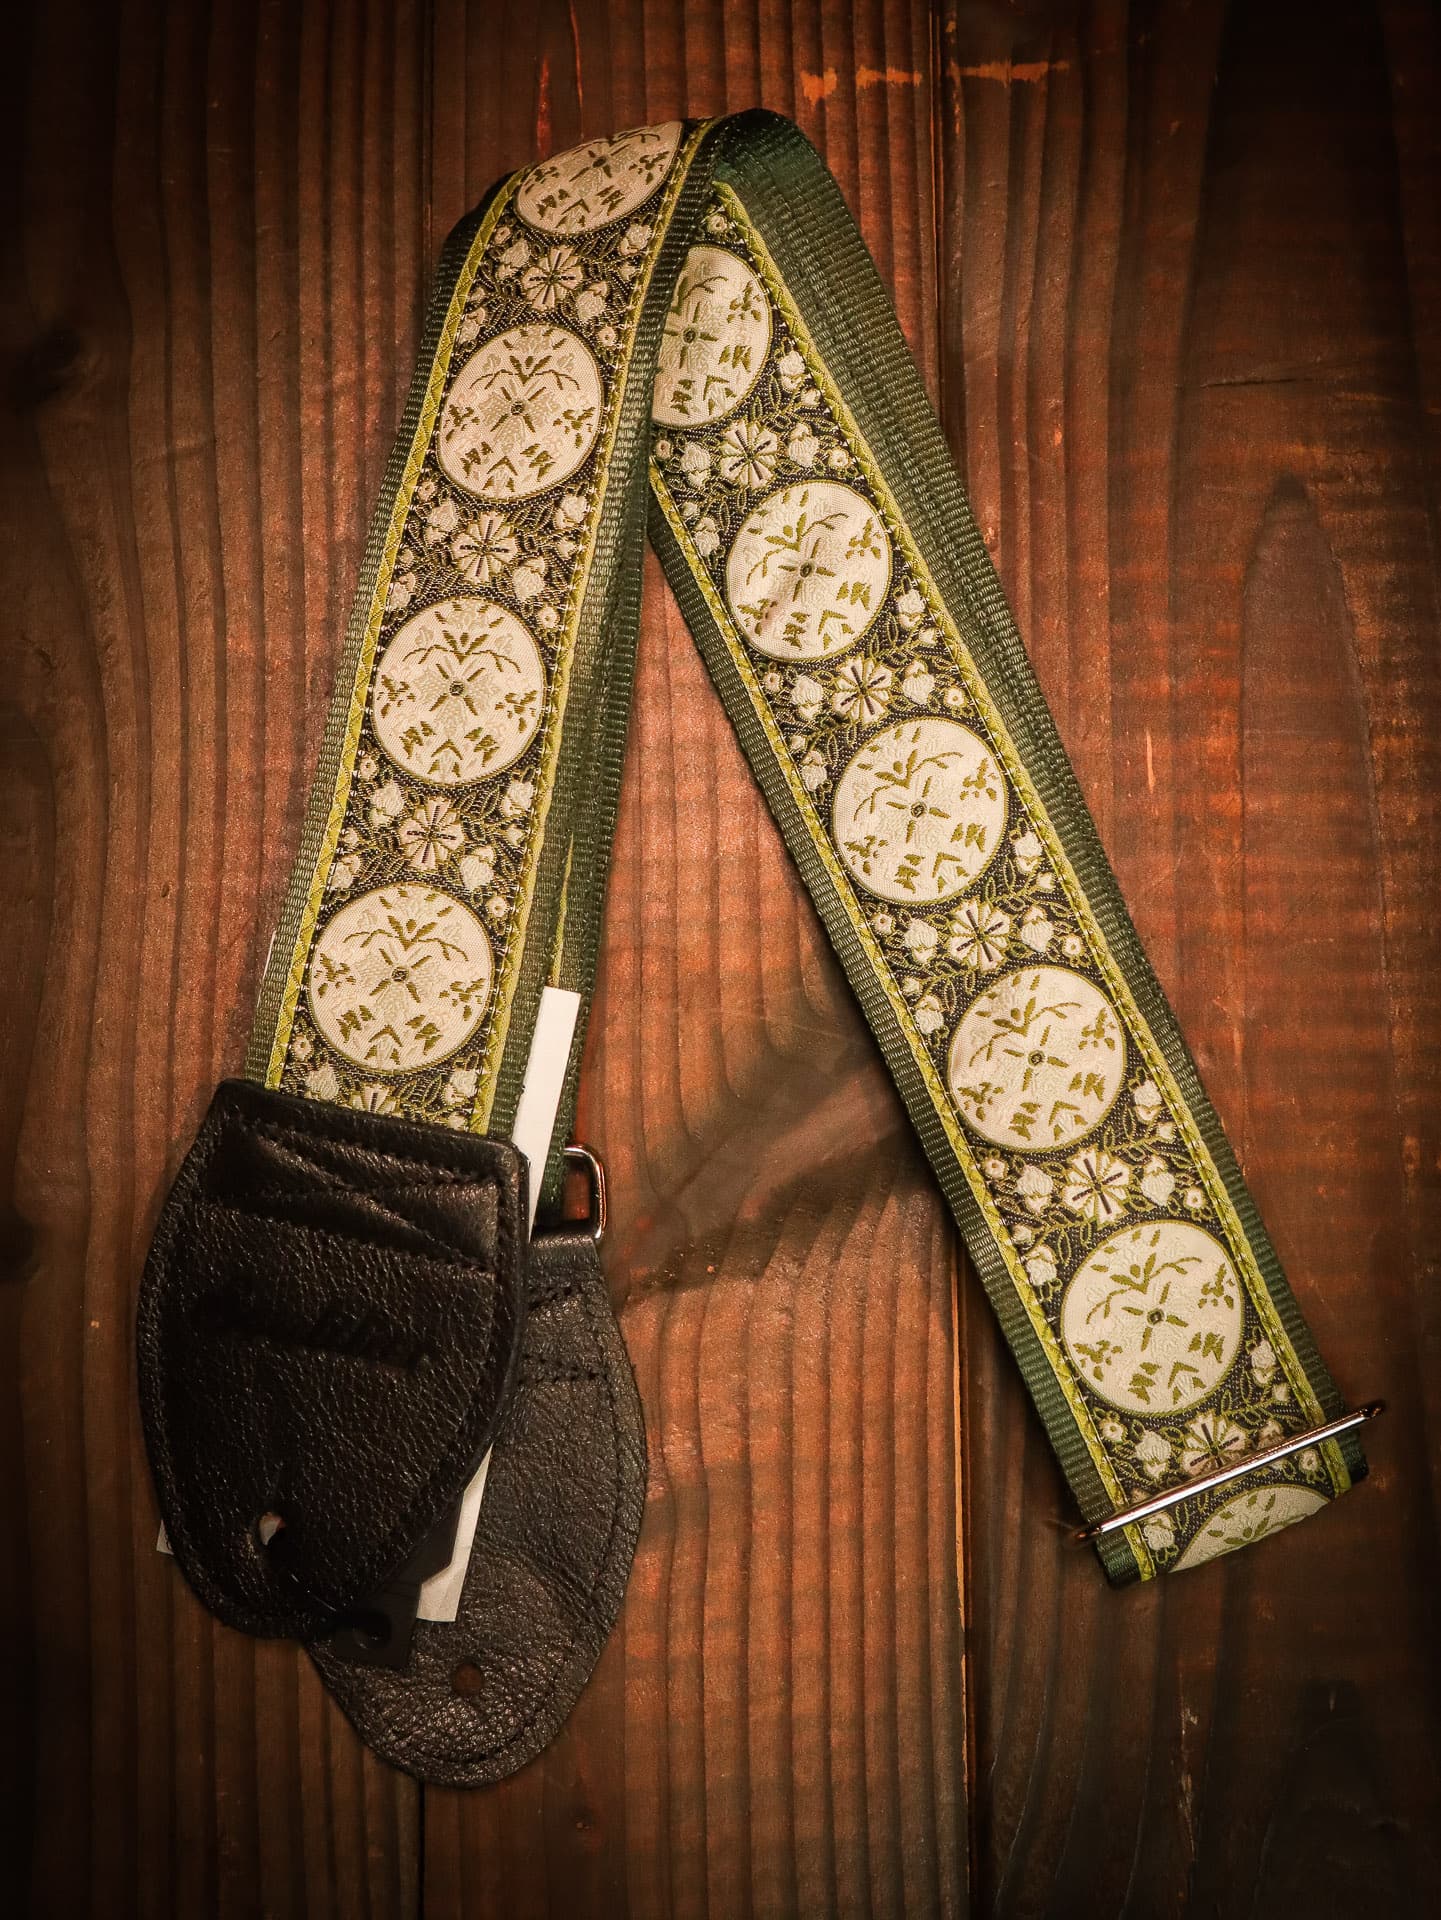 Handmade Leather Guitar Straps - The Duncan Africa Society & Guitar Co.